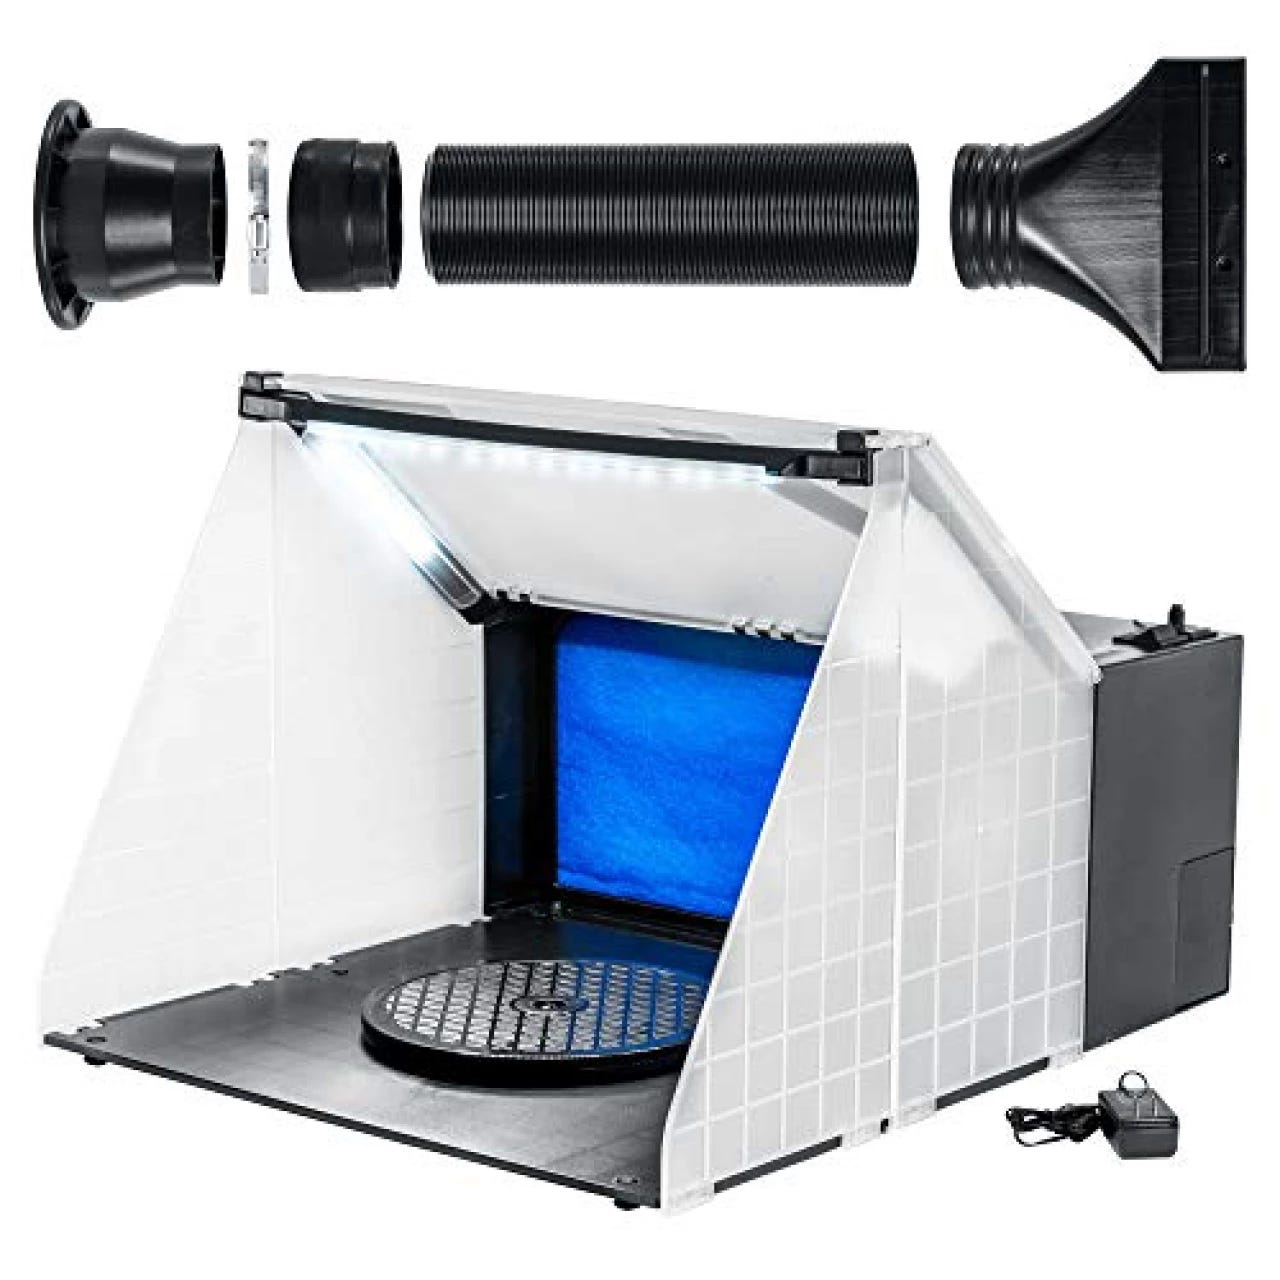 MEEDEN Airbrush Spray Booth, Paint Booth Set with 3 LED Lights & Turn  Table, Portable Airbrush Booth Kit with Air Filter & Exhaust Hose, Craft  Hobby